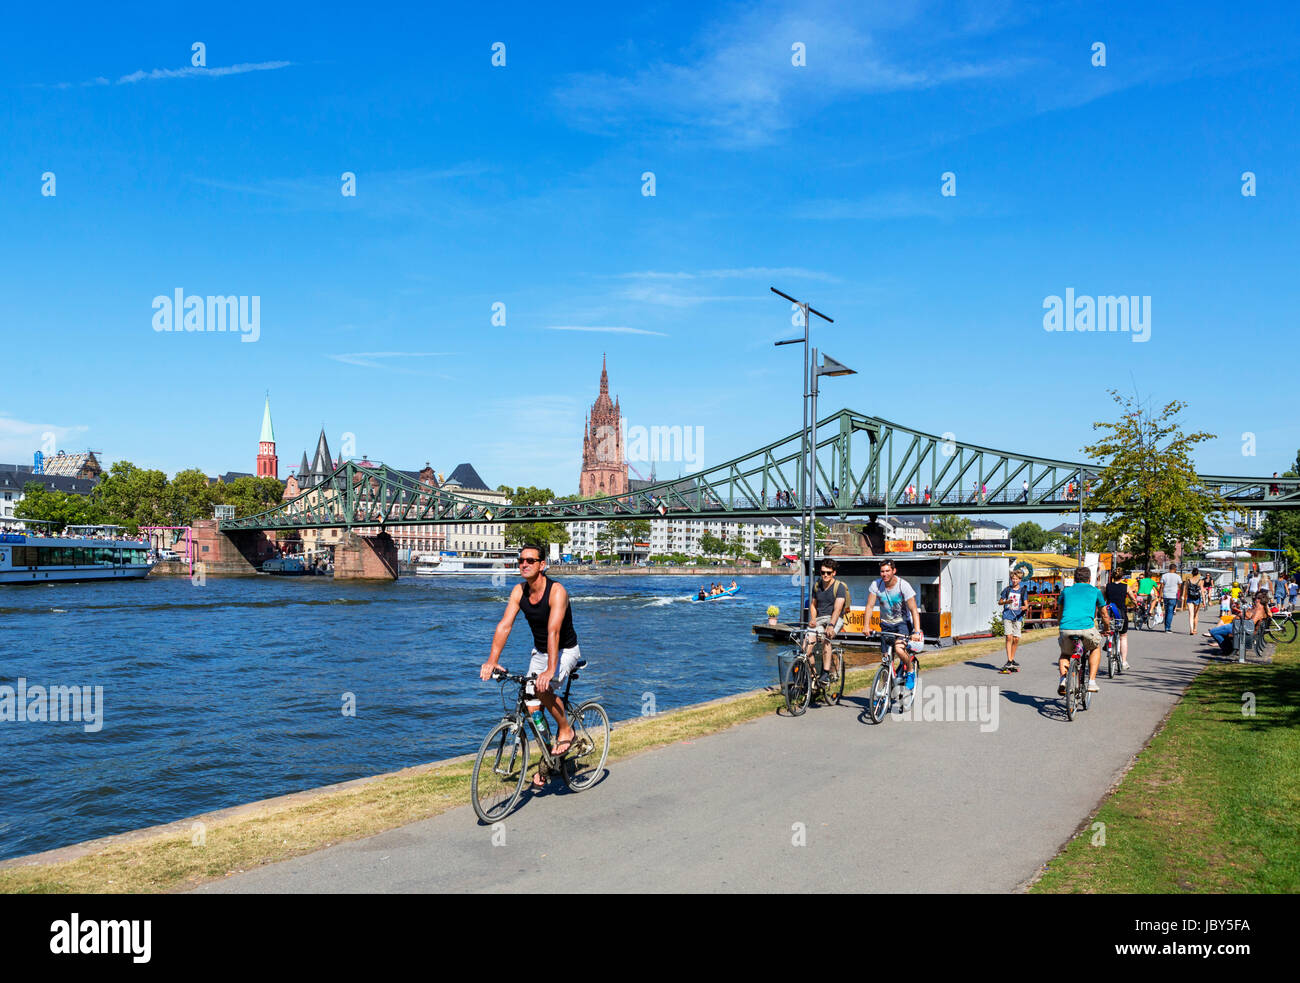 View towards Frankfurt Cathedral (Frankfurter Dom) and the Eiserner Steg from the banks of the River Main, Frankfurt, Hesse, Germany Stock Photo